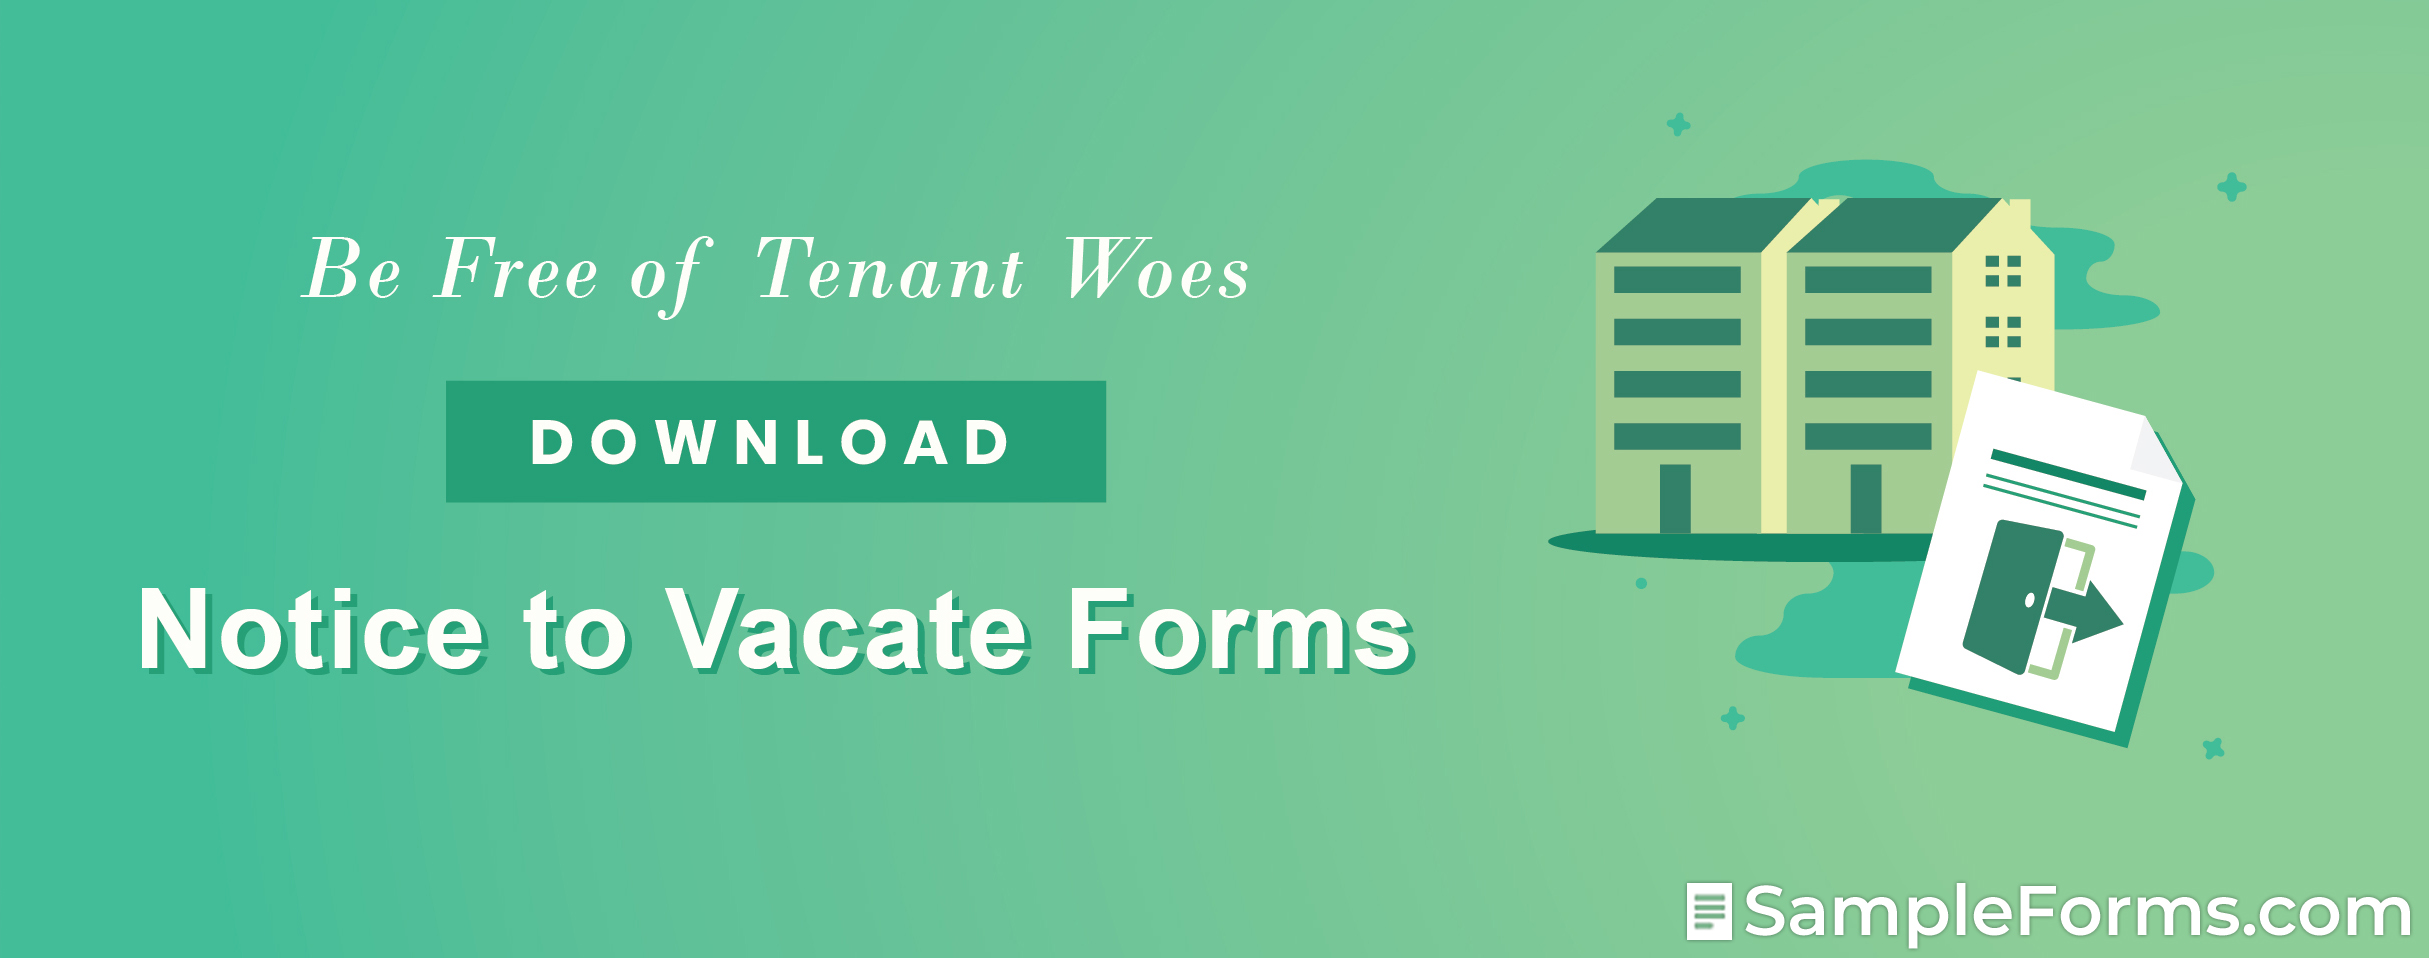 Notice to Vacate Forms